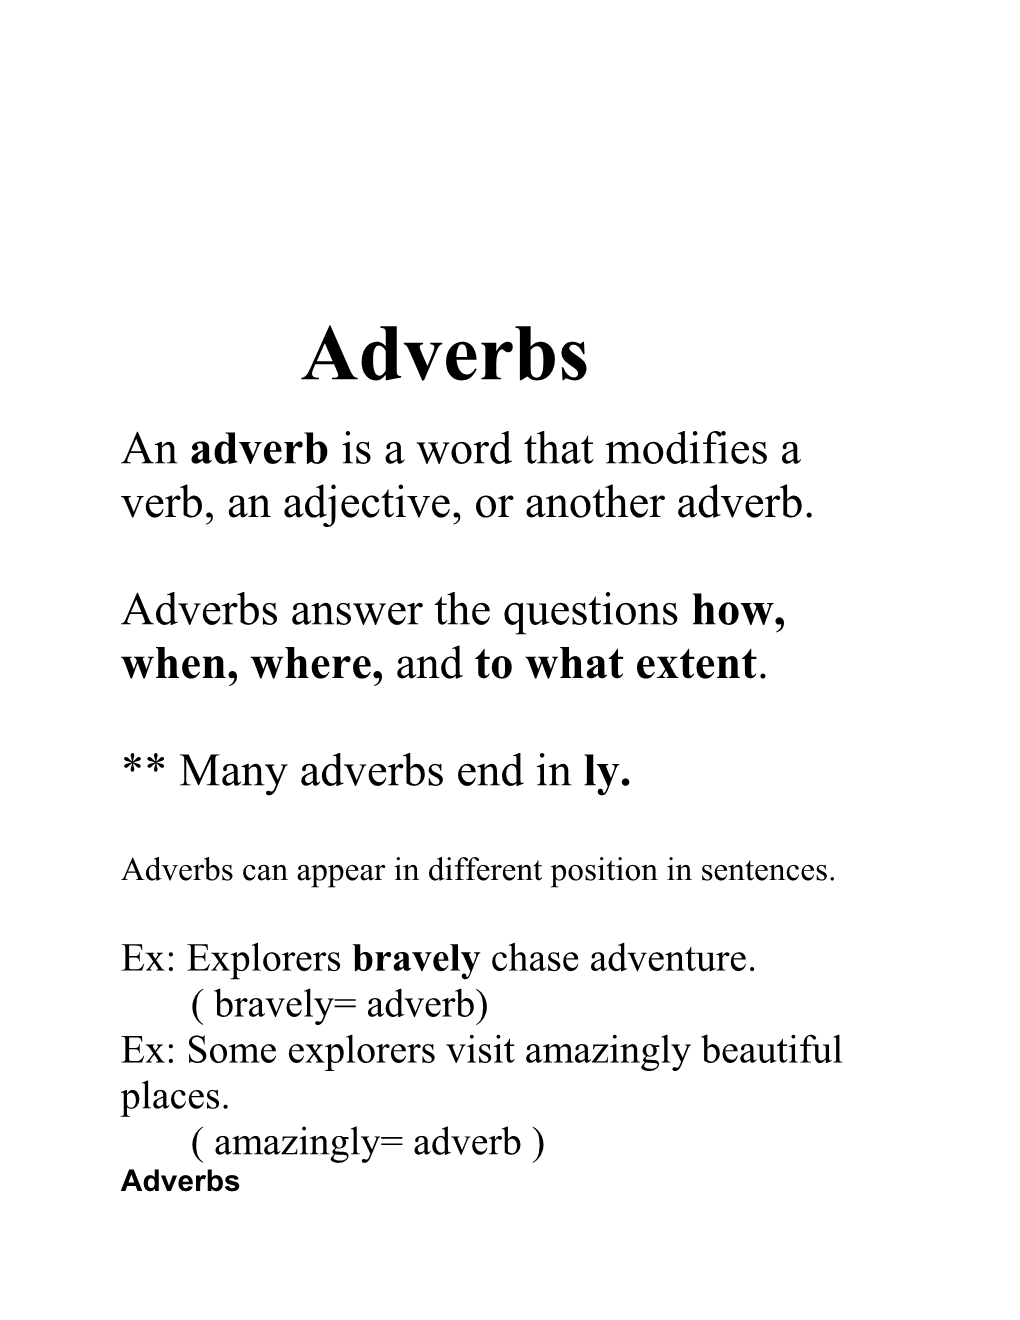 An Adverb Is a Word That Modifies a Verb, an Adjective, Or Another Adverb